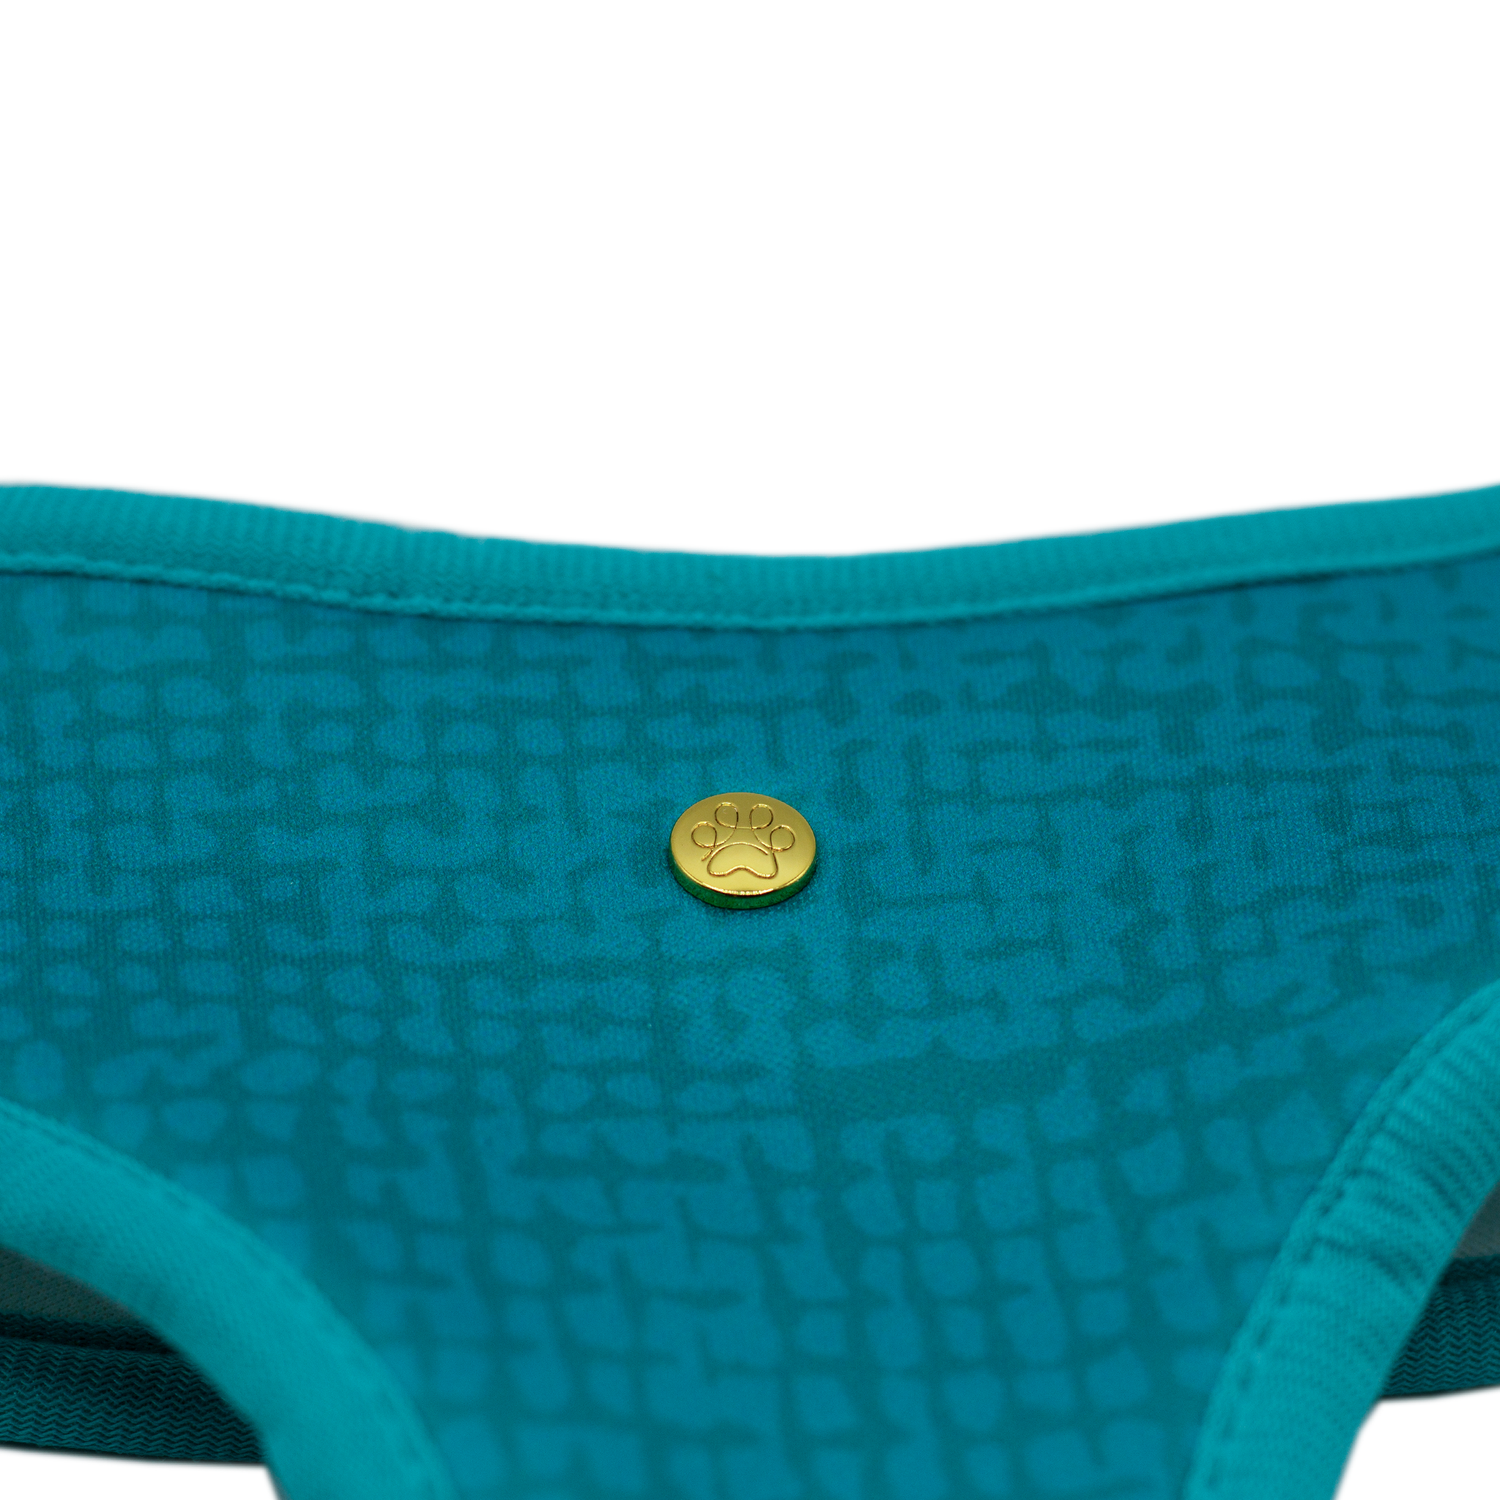 Pata Paw Les Alpes reversible harness showing a close-up of its golden paw and a timeless and chic texture pattern in teal.